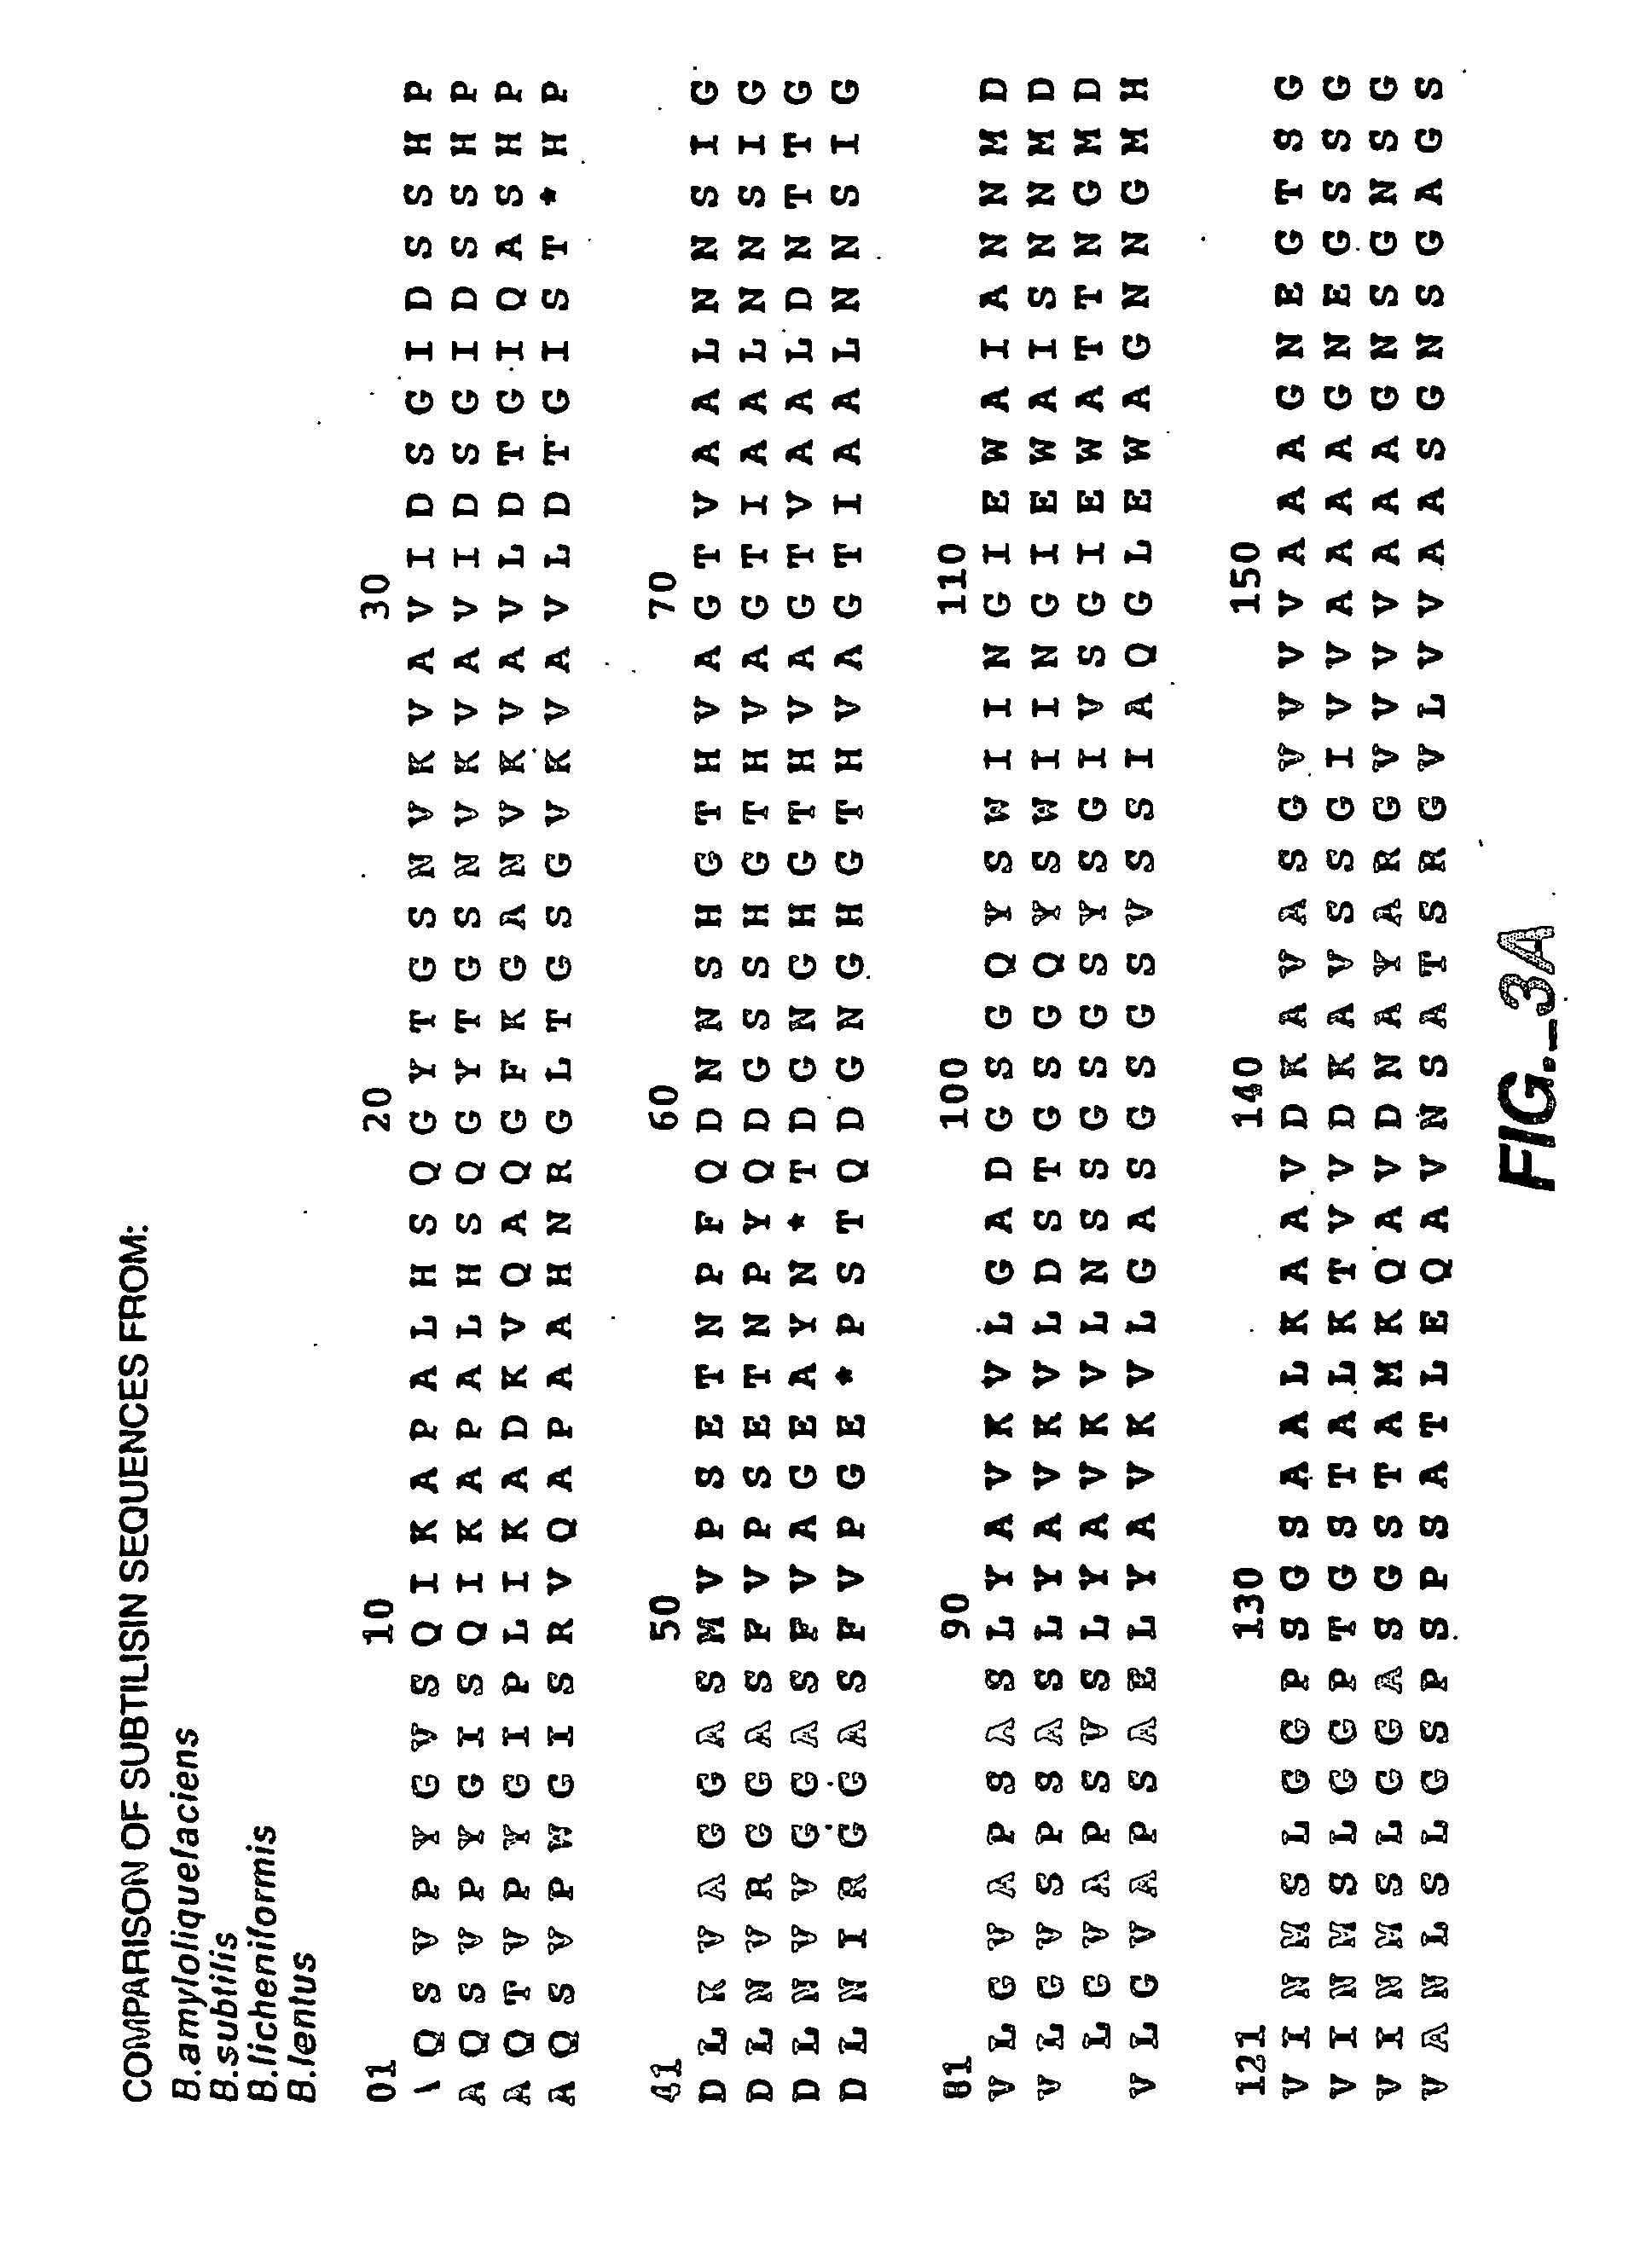 Methods for site-directed mutagenesis and targeted randomization